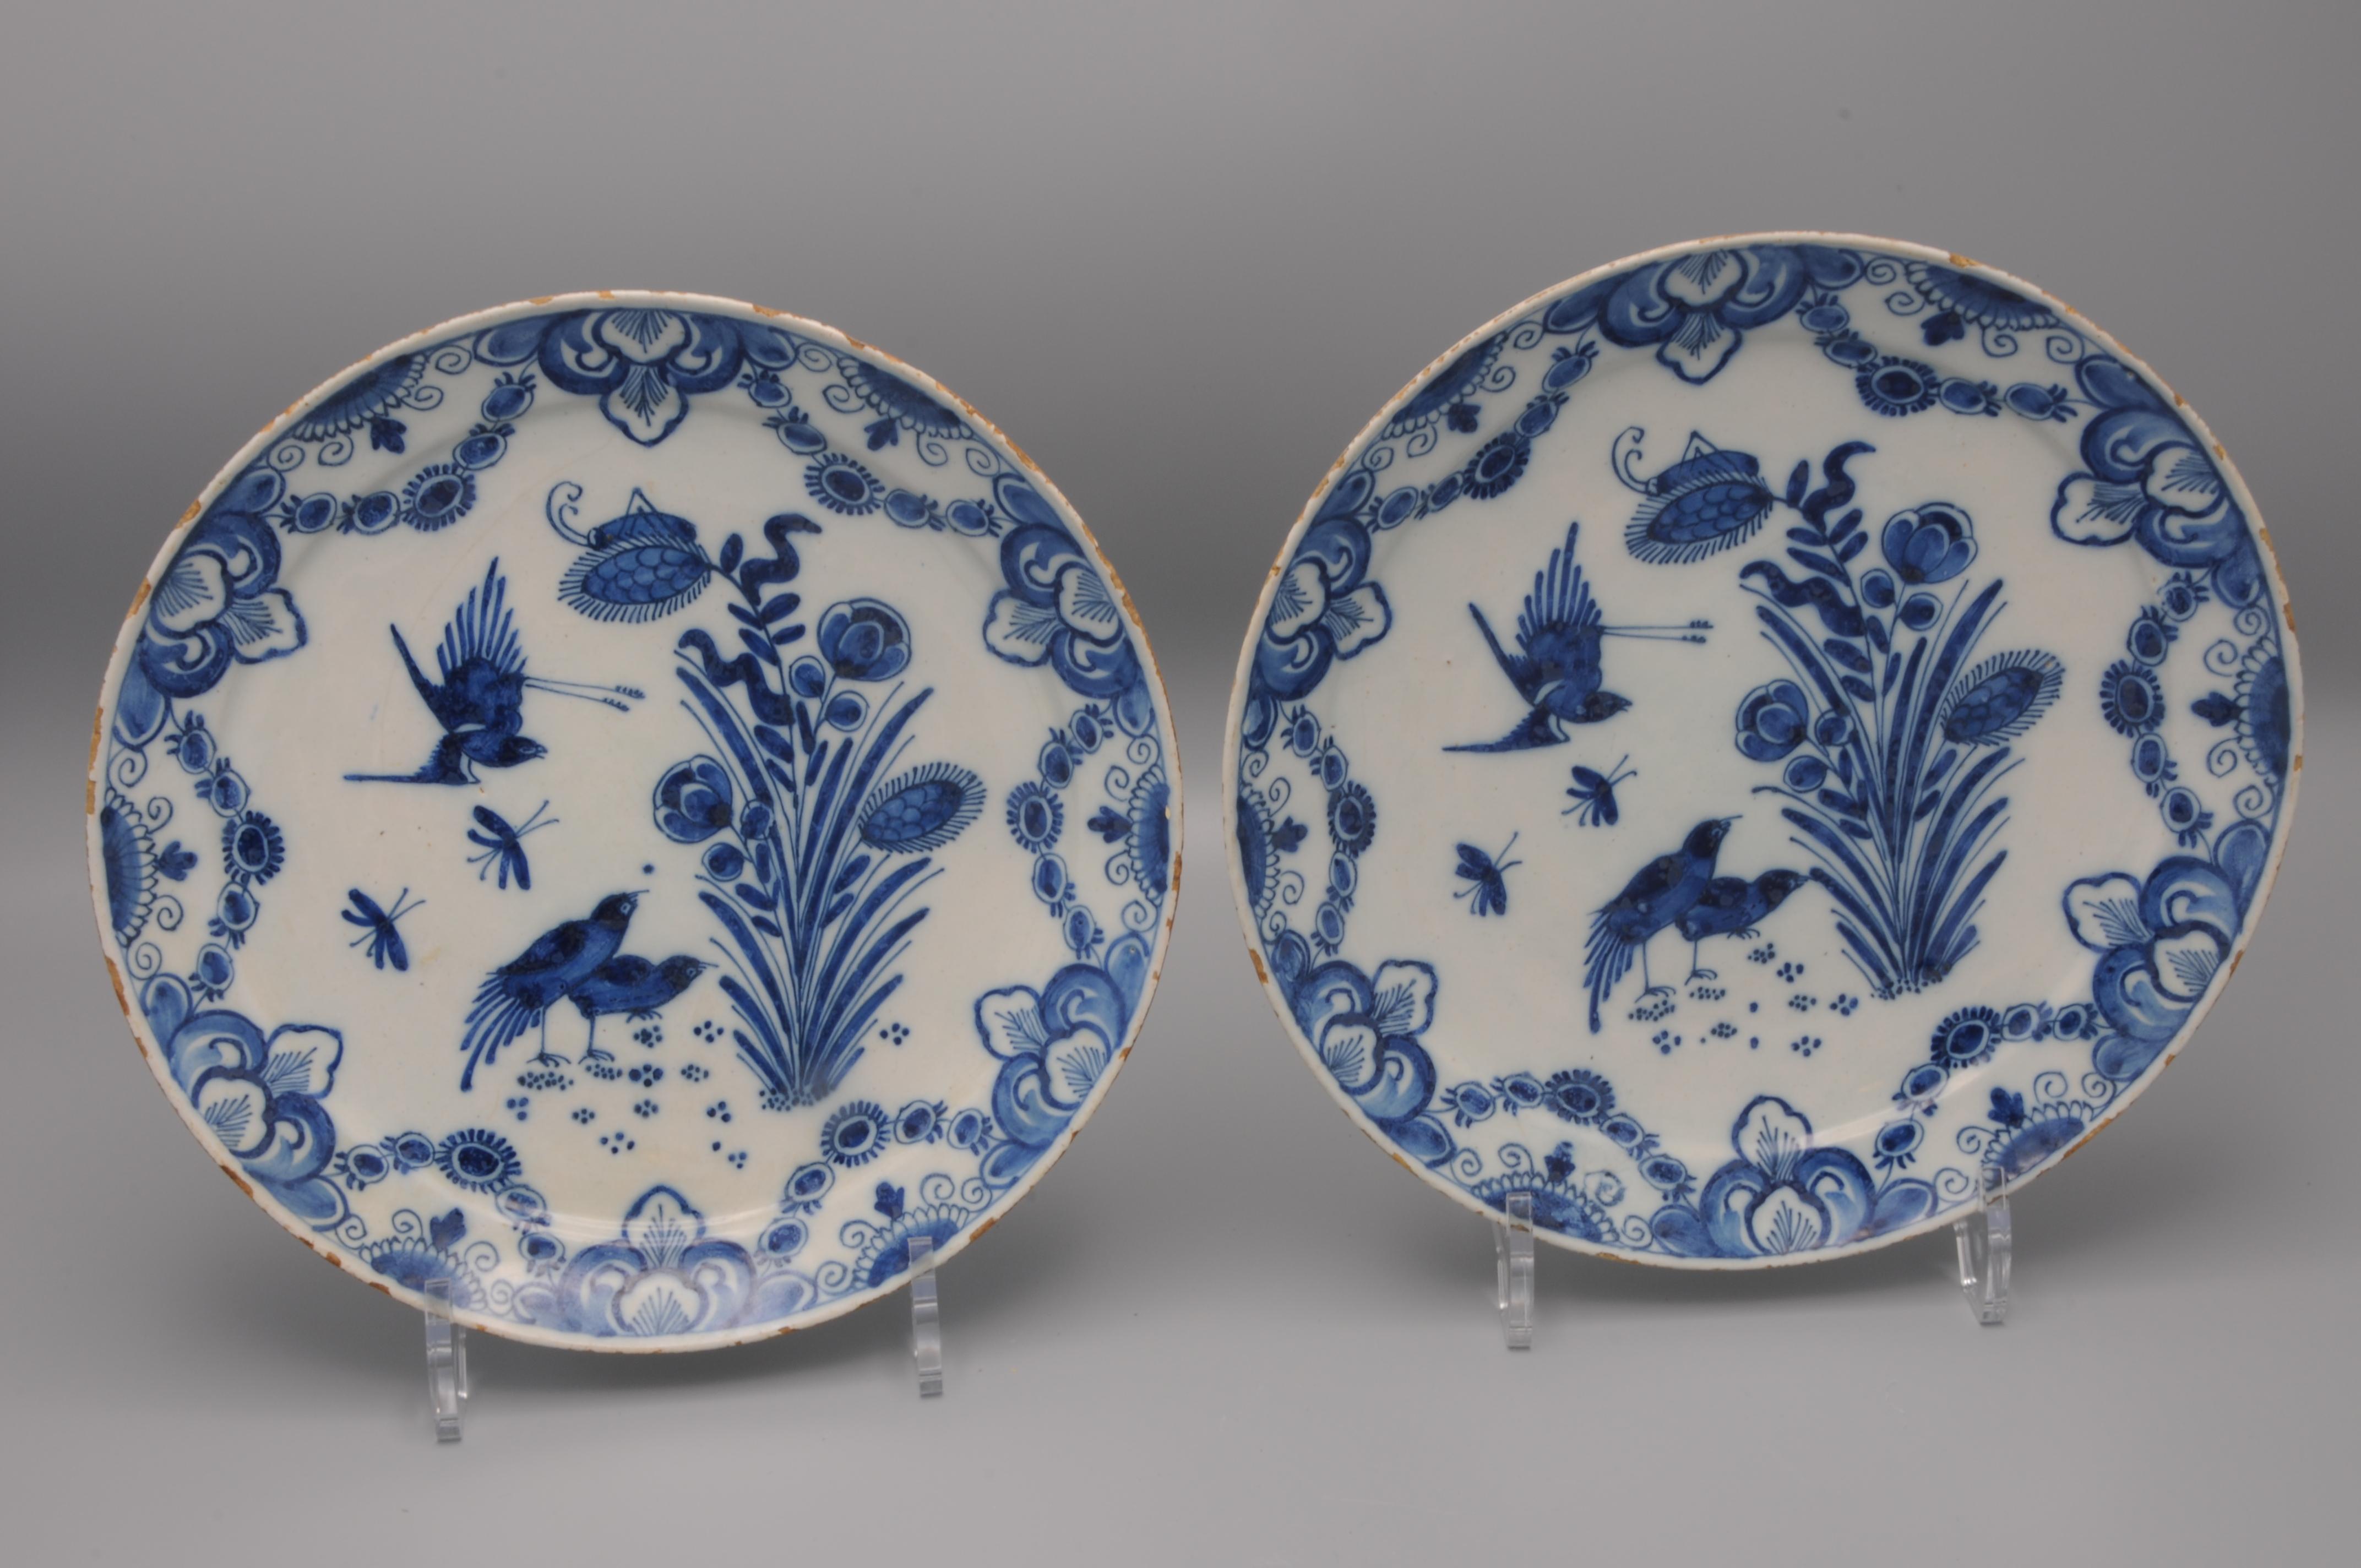 Excellent pair of mid 18th century Delftware plates with fine decoration of birds, insects and flowers in a chinoiserie style fashion. 
Border adorned with foliage scrolls. 

Marked IVL for Johannes and Margaretha van Lockhorst-van der Gucht, owners